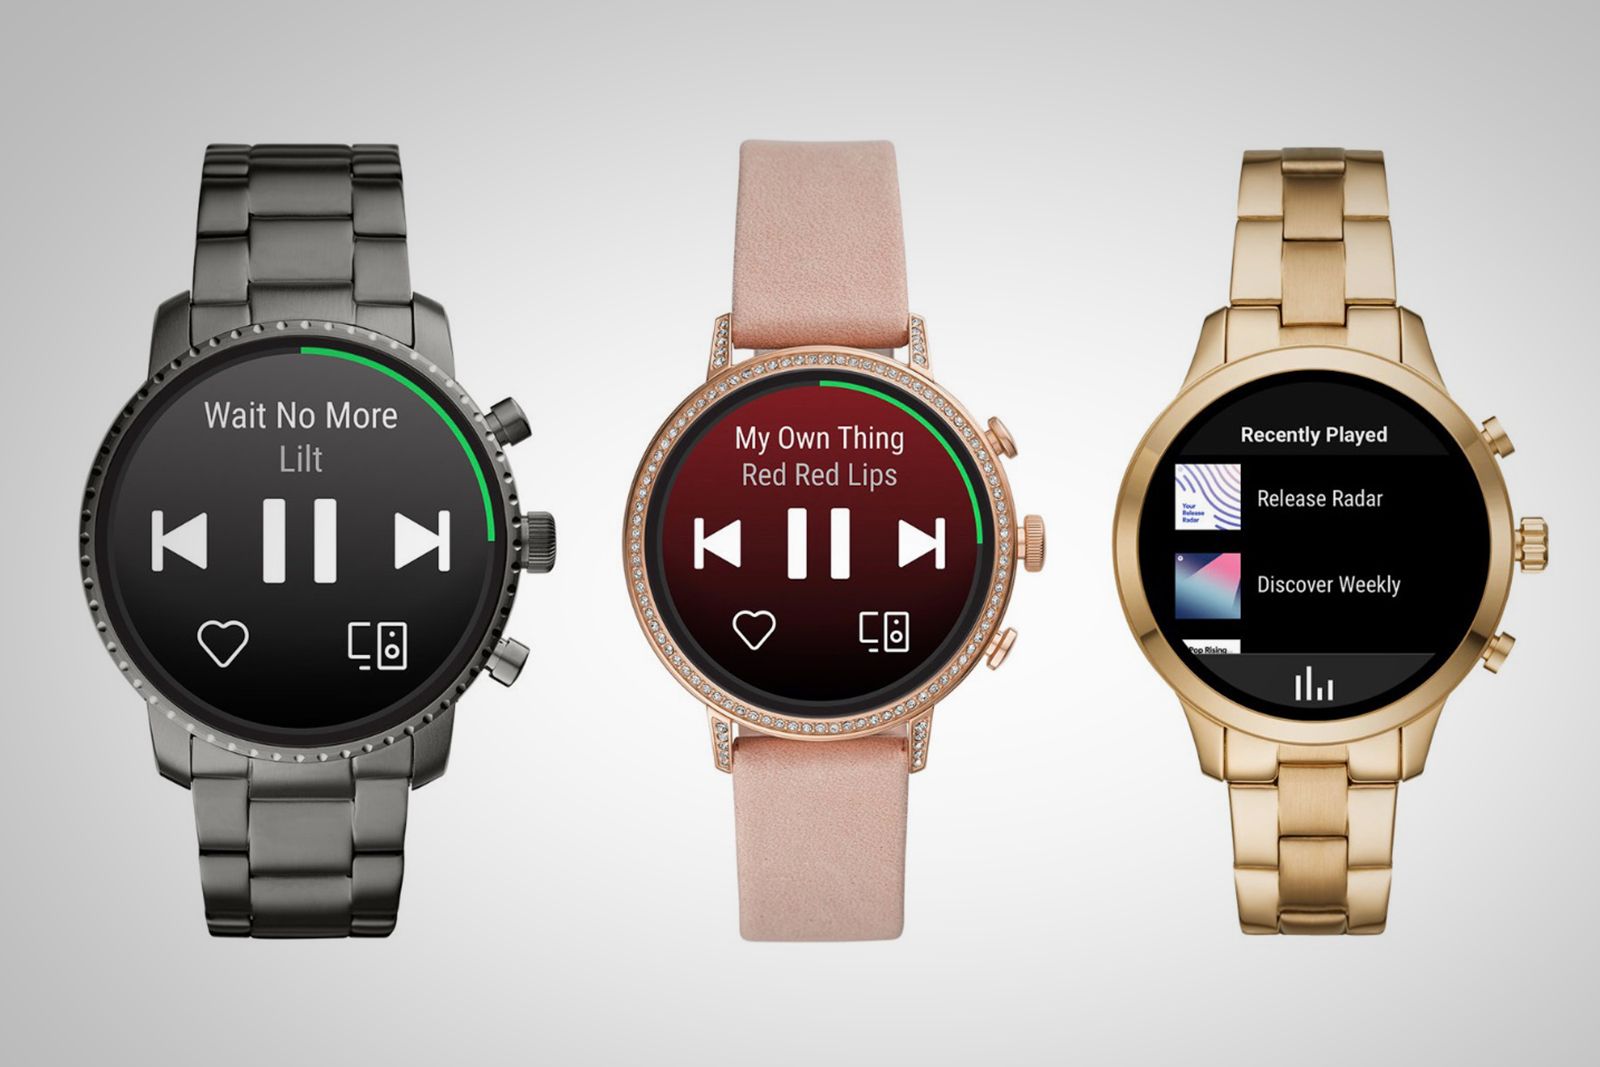 Listen to Spotify tunes on your Wear OS watch with this official app image 1